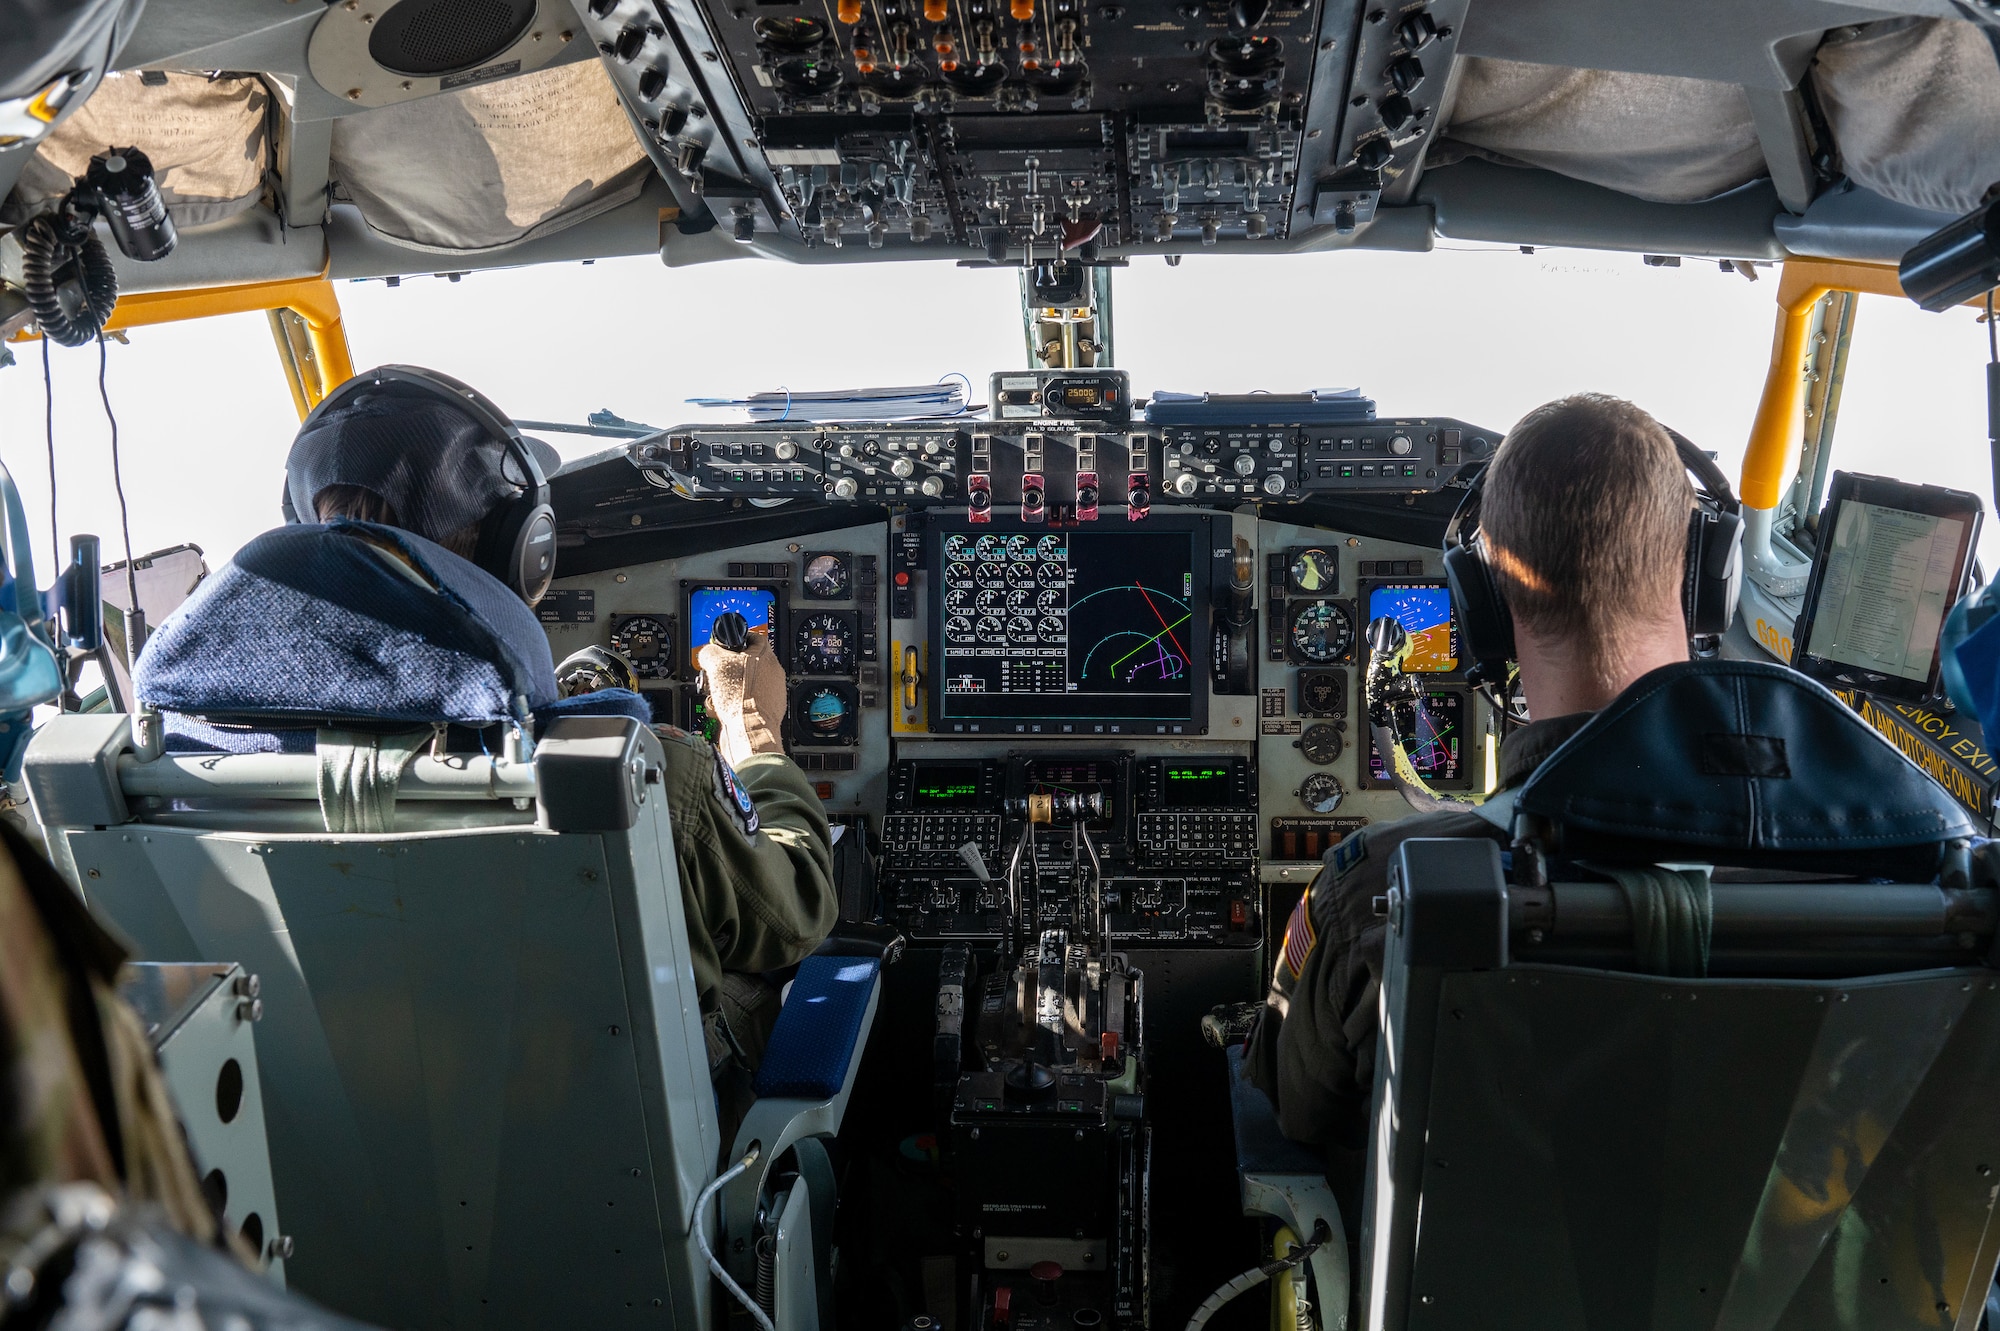 U.S. Air Force Maj. Nate (MOCA) Mocalis, 92nd Air Refueling Squadron pilot, flies a KC-135 Stratotanker alongside his co-pilot Capt Andrew Bruffy, Squadron/duty title during a Phase 3 Lead Wing exercise, June 6th, 2023. The exercise emphasized aircrew endurance while crew resting on the aircraft, wearable devices to track real time fatigue/stress on the aircrew, dynamic air refueling concepts, testing of a variety of the KC-135 mission sets, and included an advanced 72-hour endurance event.